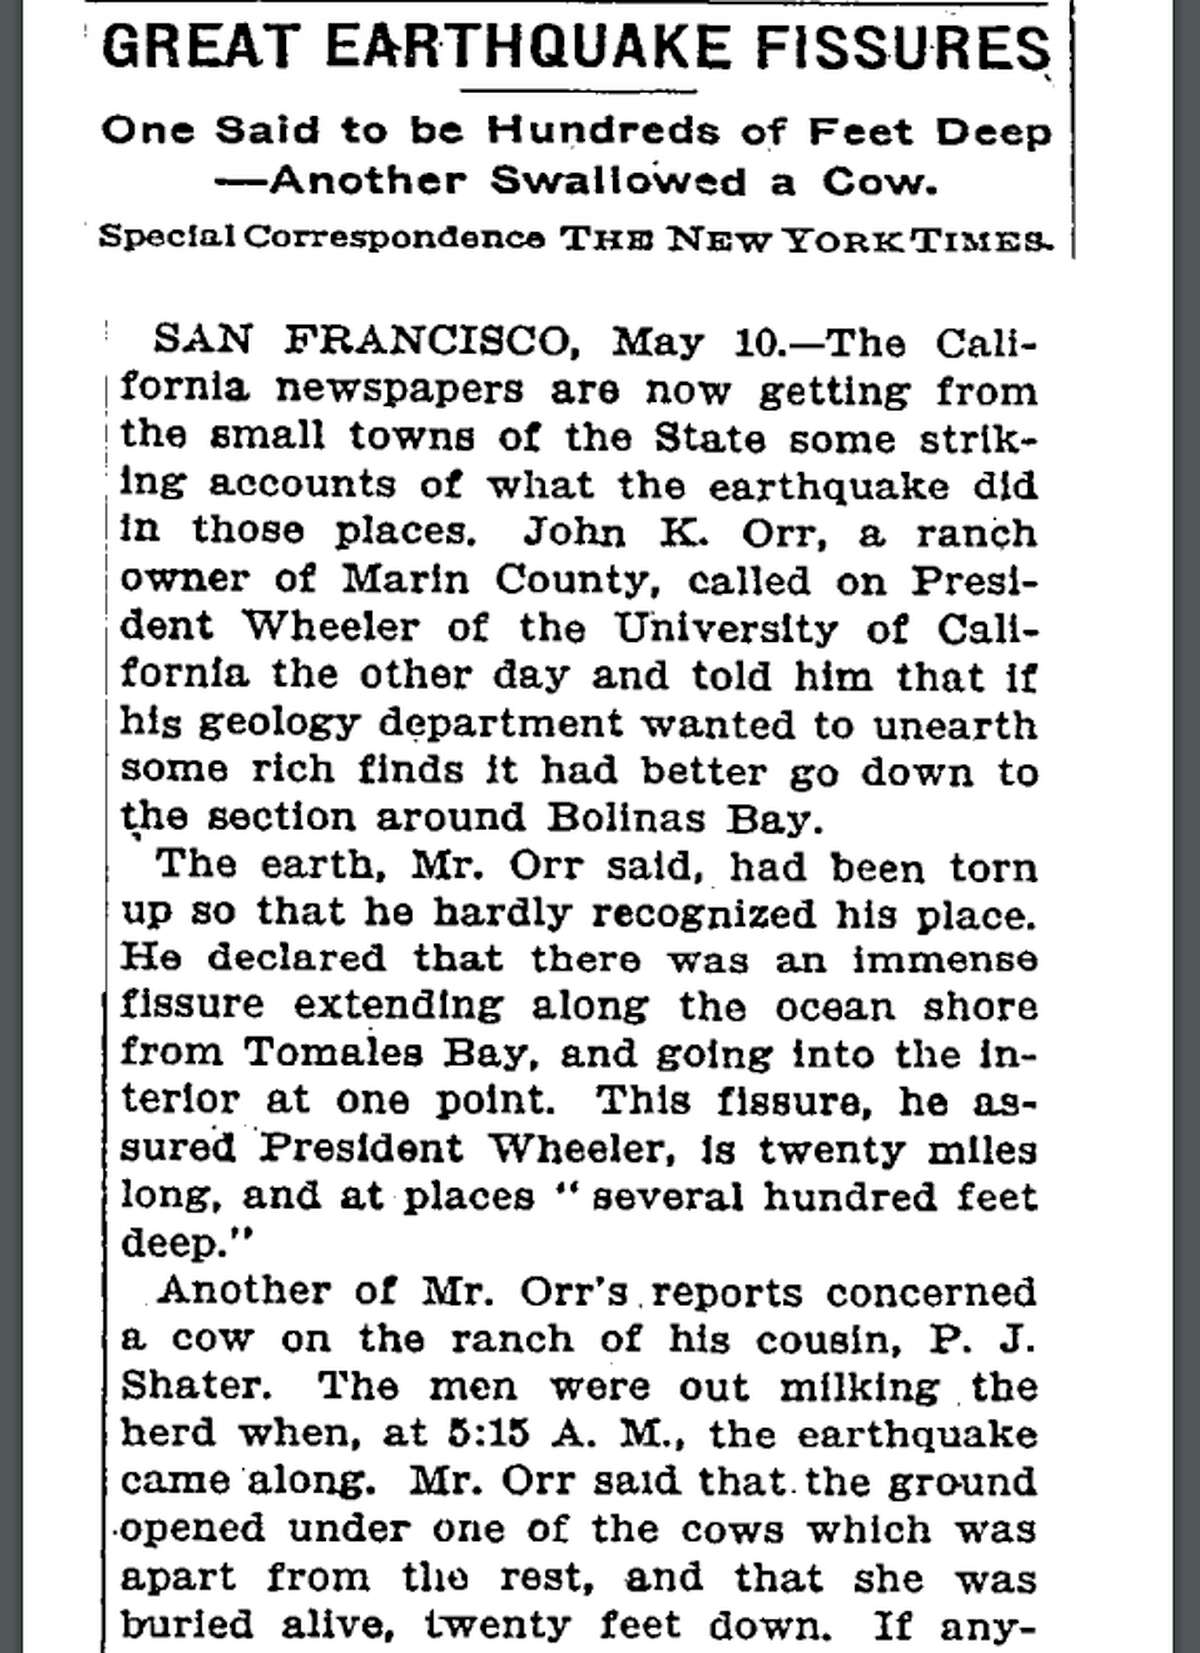 A May 10, 1906, New York Times dispatch from San Francisco describing damage from the devastating April 18 earthquake mentions a fissure "hundreds of feed deep" and another that swallowed cow.